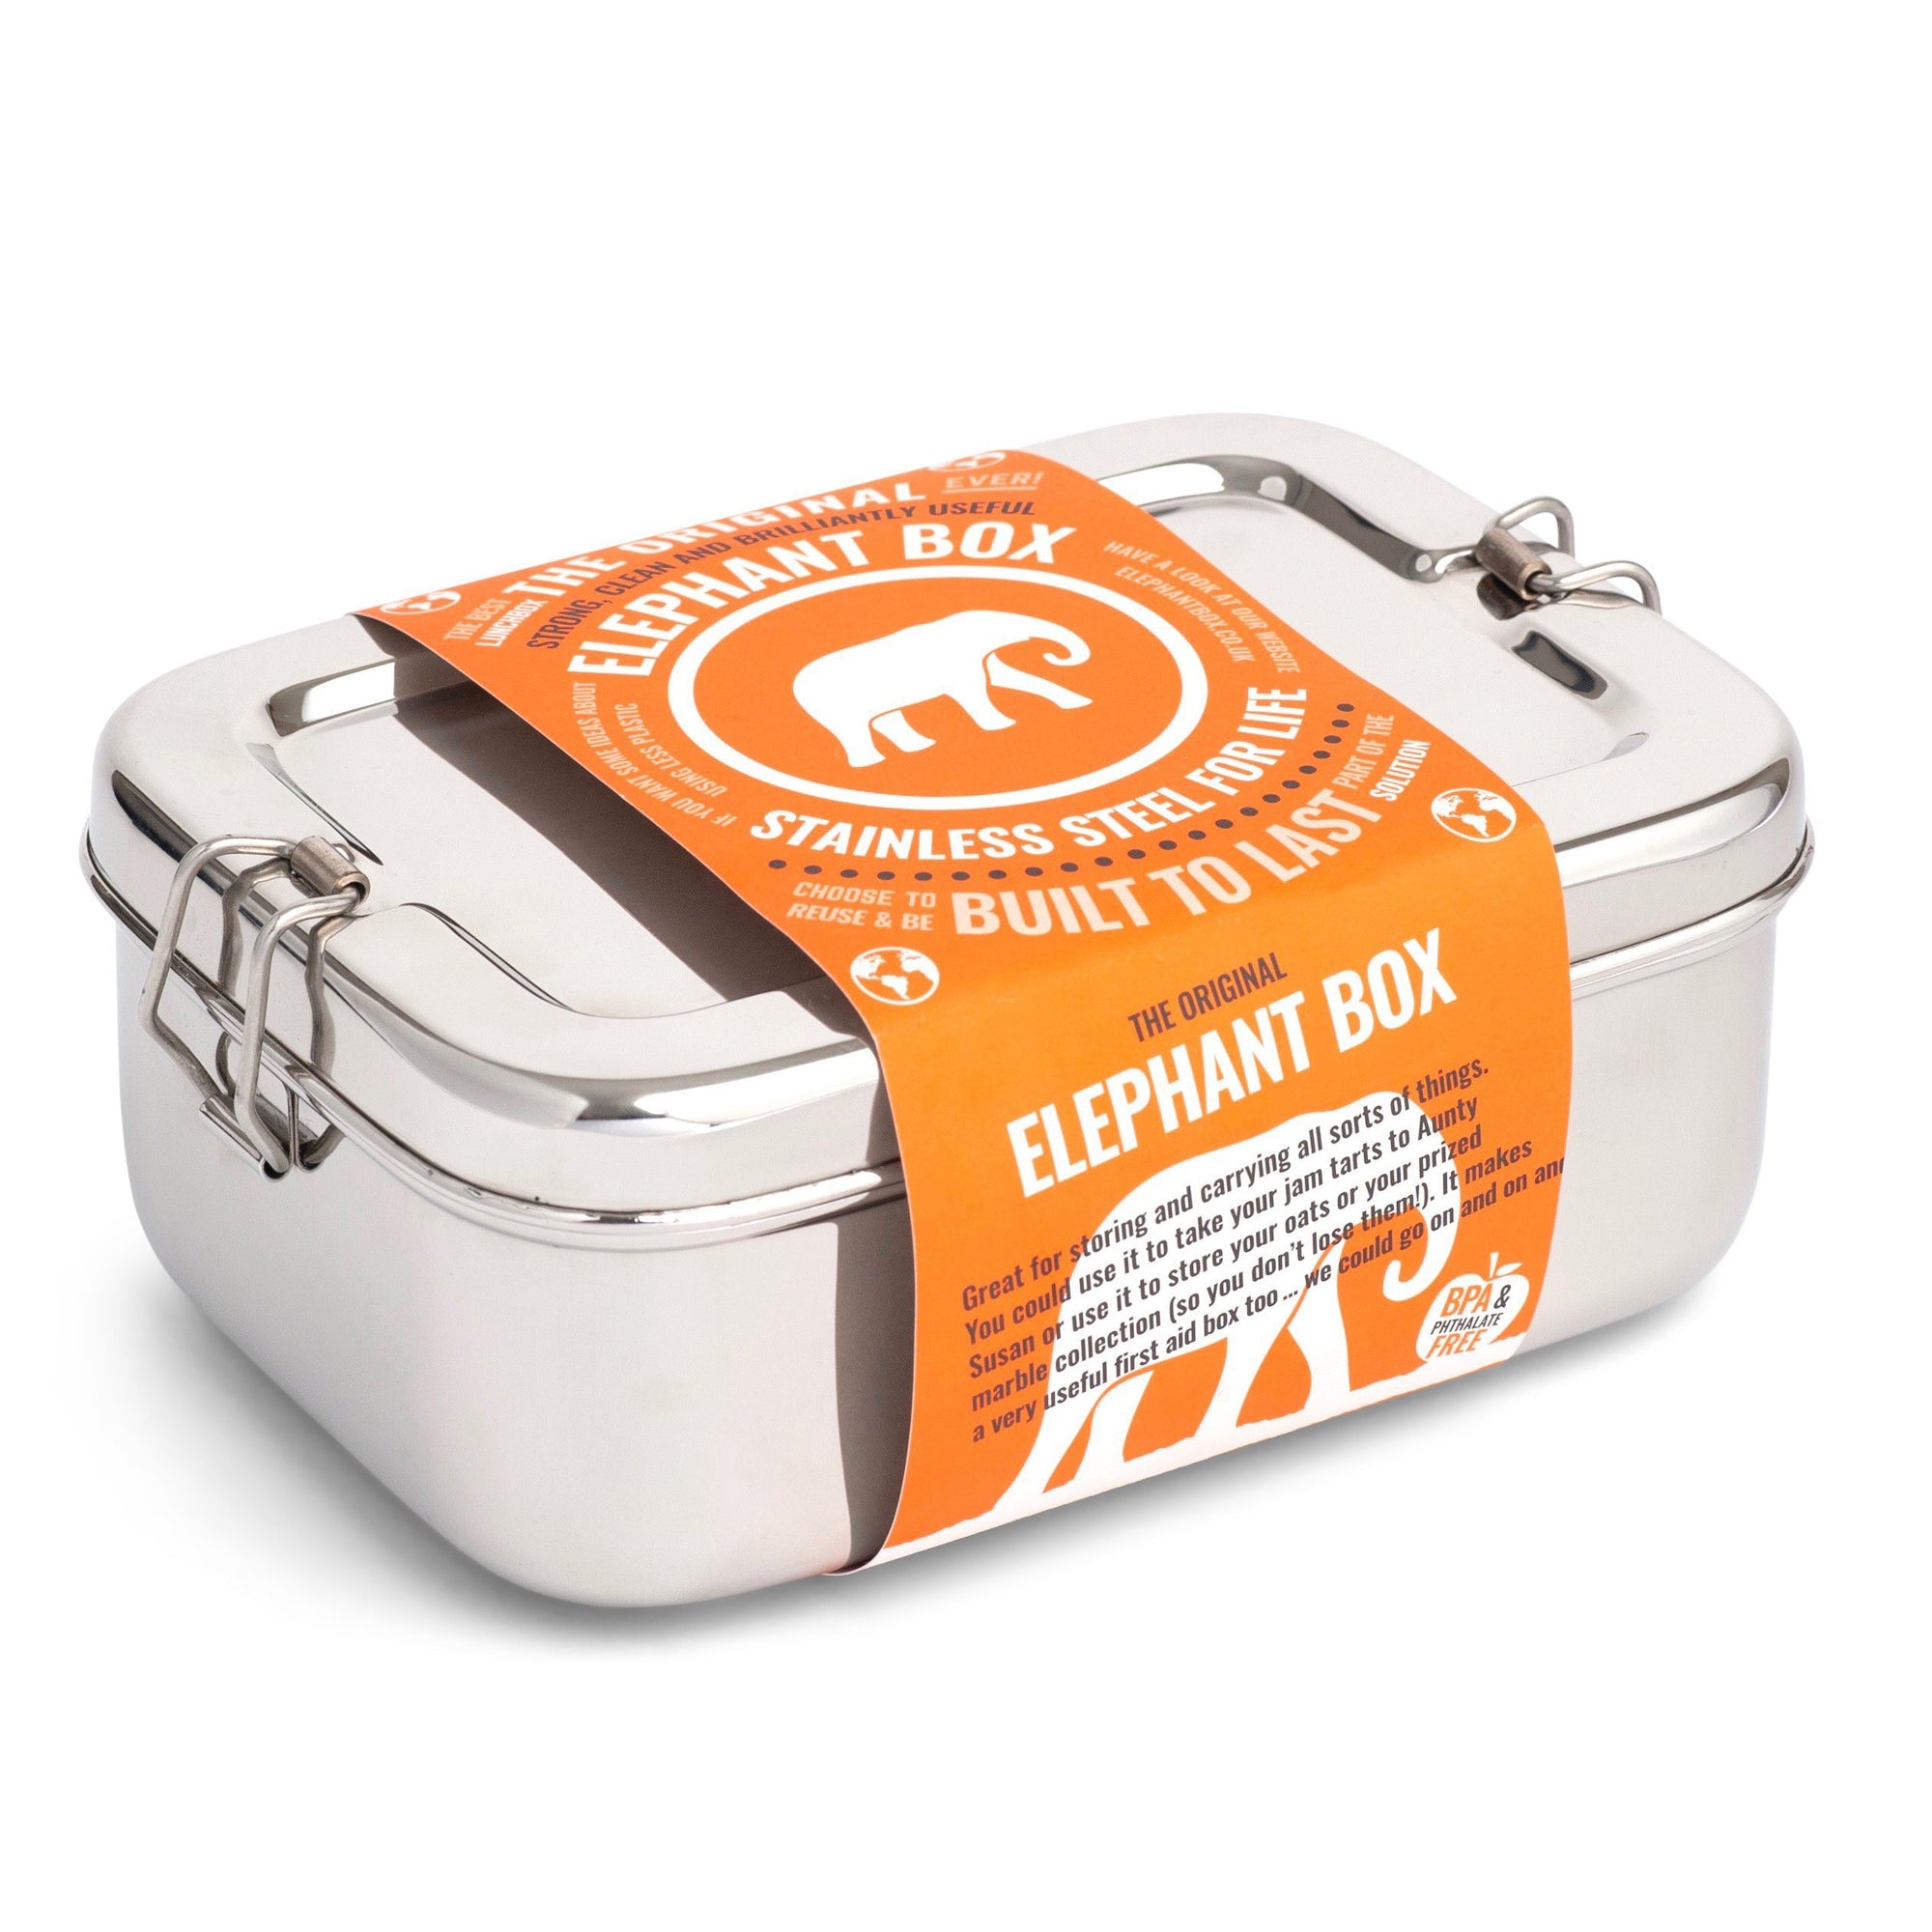 Aluminum or stainless steel lunch box: which is better? ✓